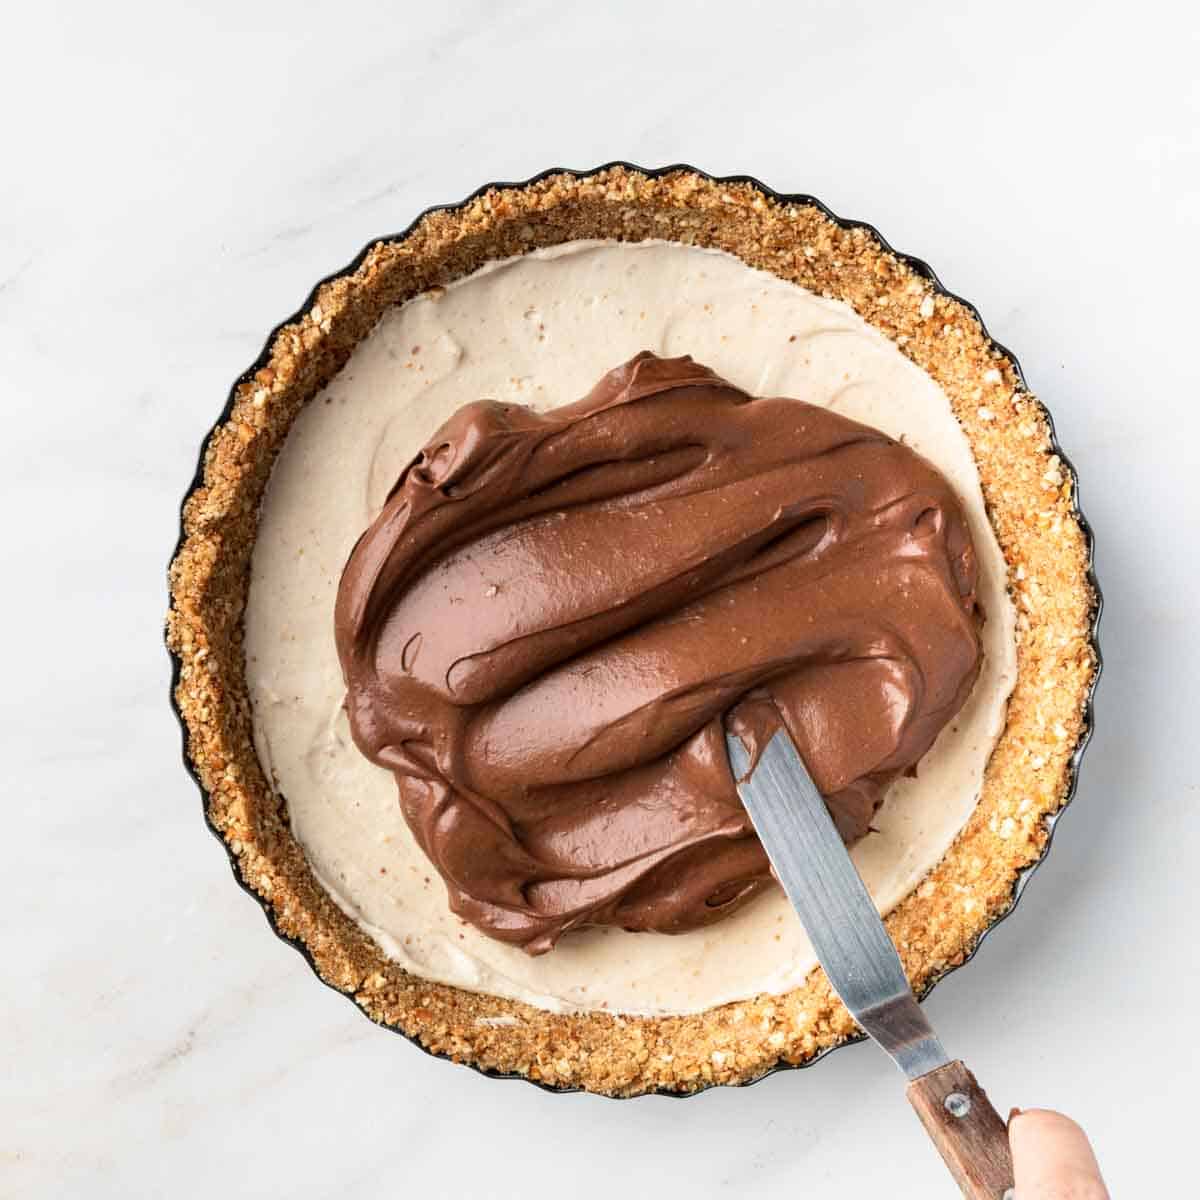 Spreading the chocolate mousse over the peanut butter layer